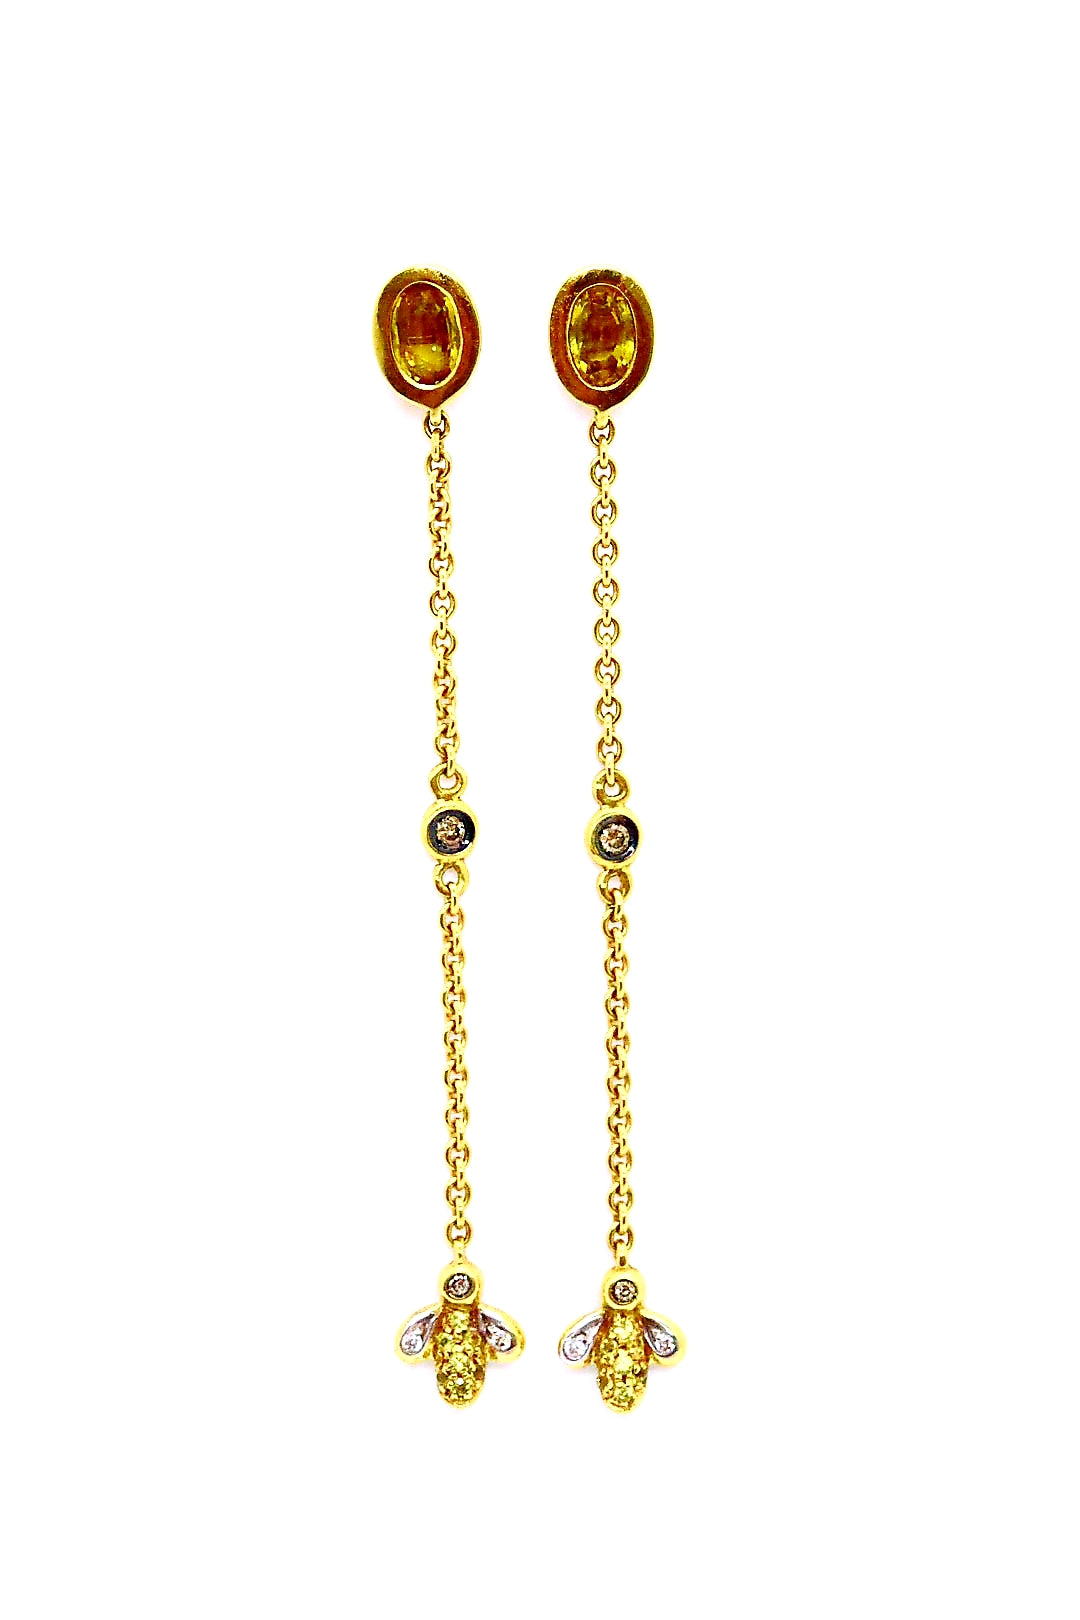 D'LIDO 18 KT EARRINGS WITH 1.52 Cts YELLOW SAPPHIRES & DIAMOND